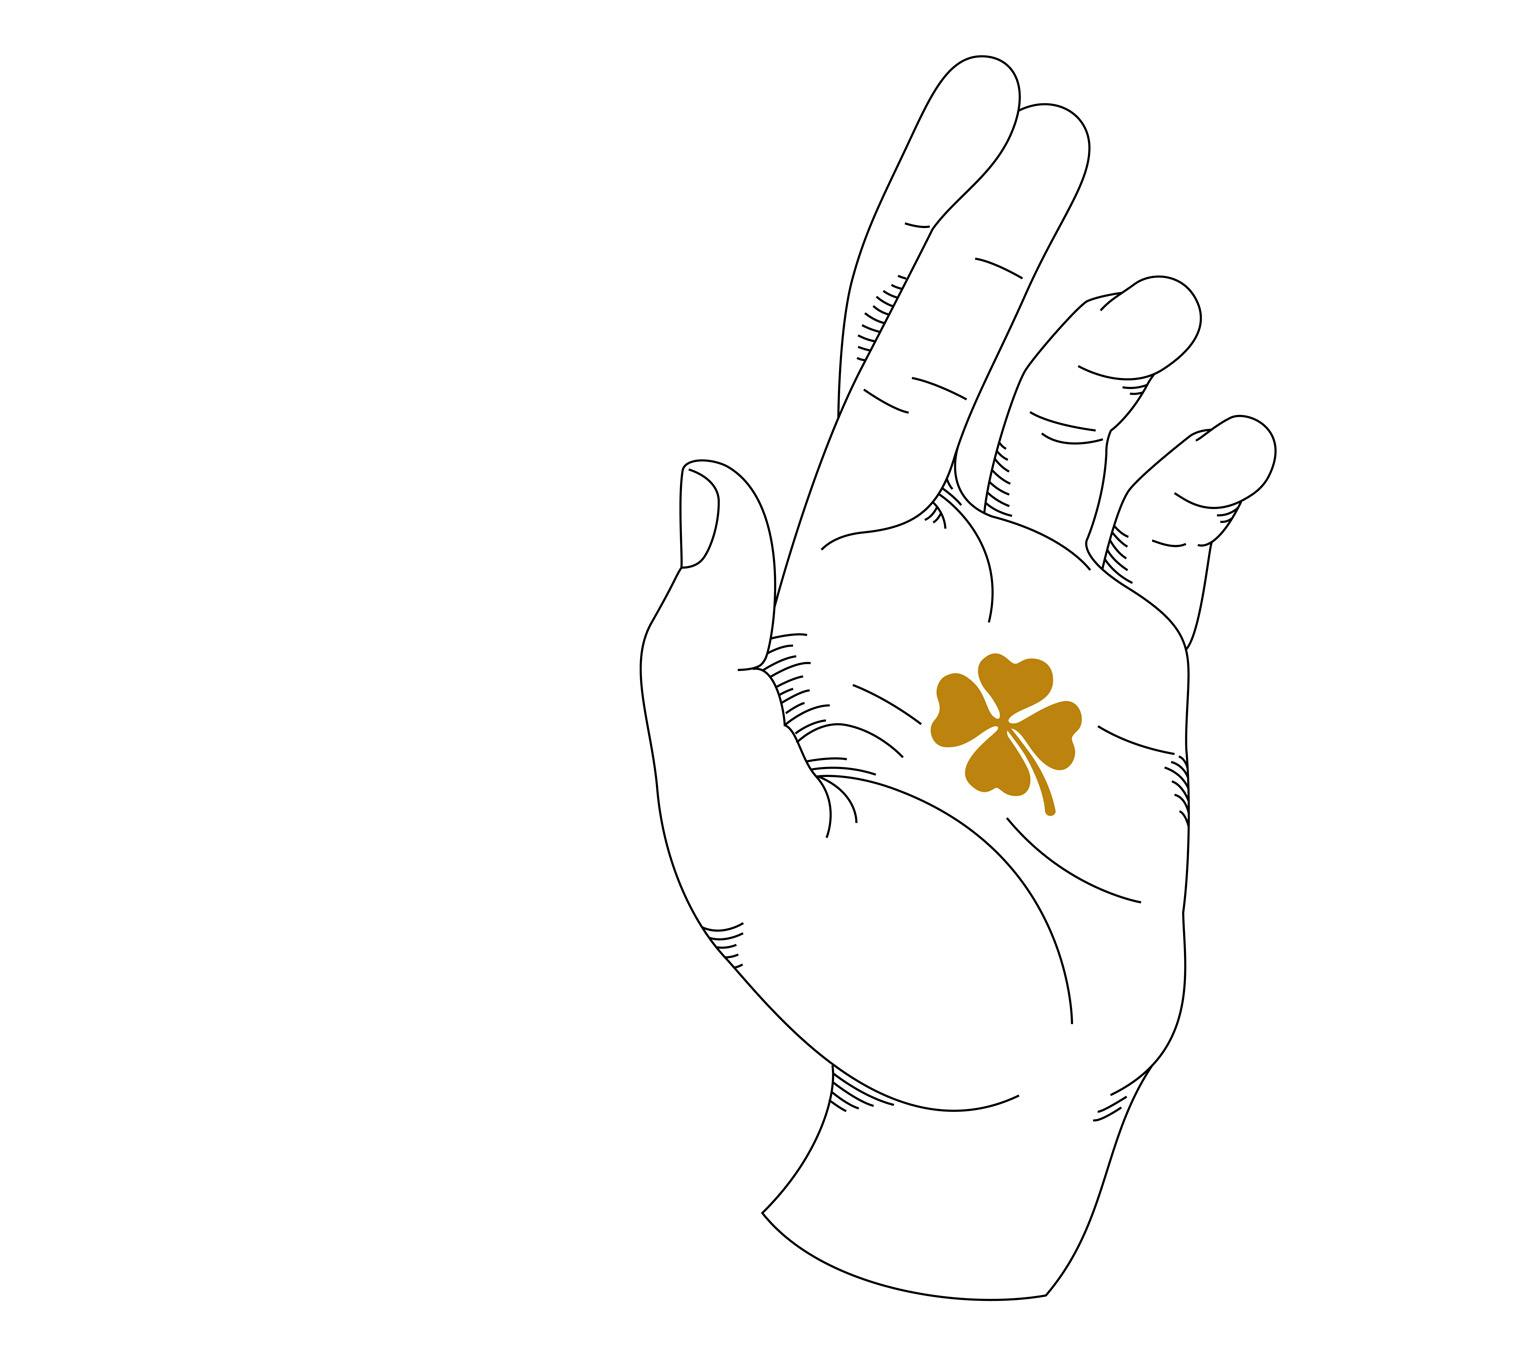 An illustration of a hand with a gold four-leaf clover in the middle